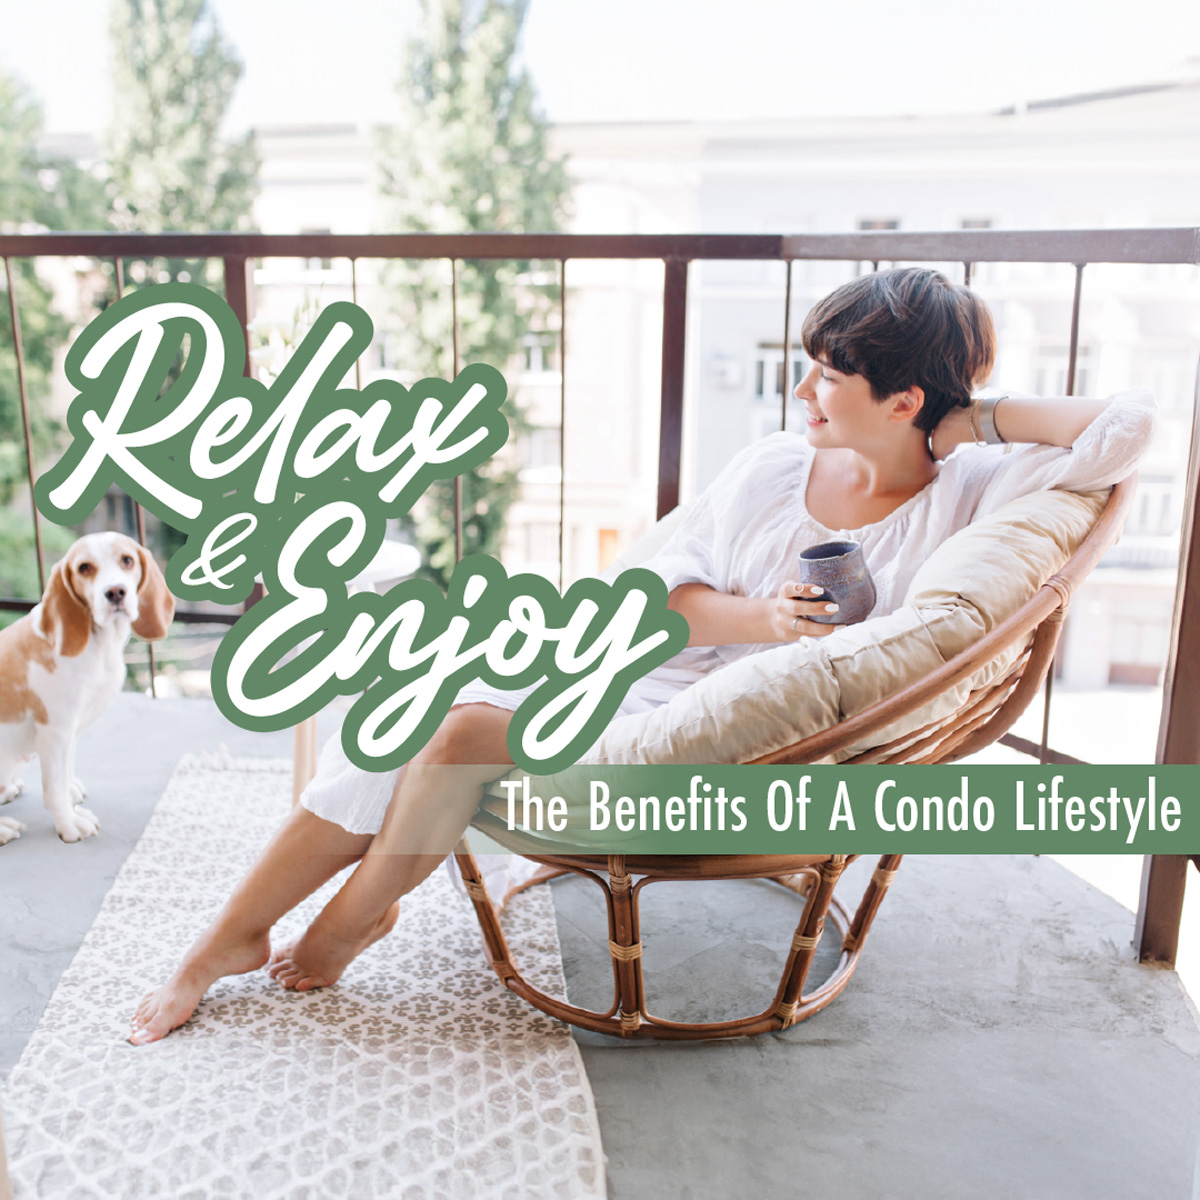 Ready to embrace a laid-back lifestyle? Condo living could be just what you need! Discover all the amazing possibilities that await you. Let's make it happen! 🏡 #condoliving #lowmaintenance #relaxedliving